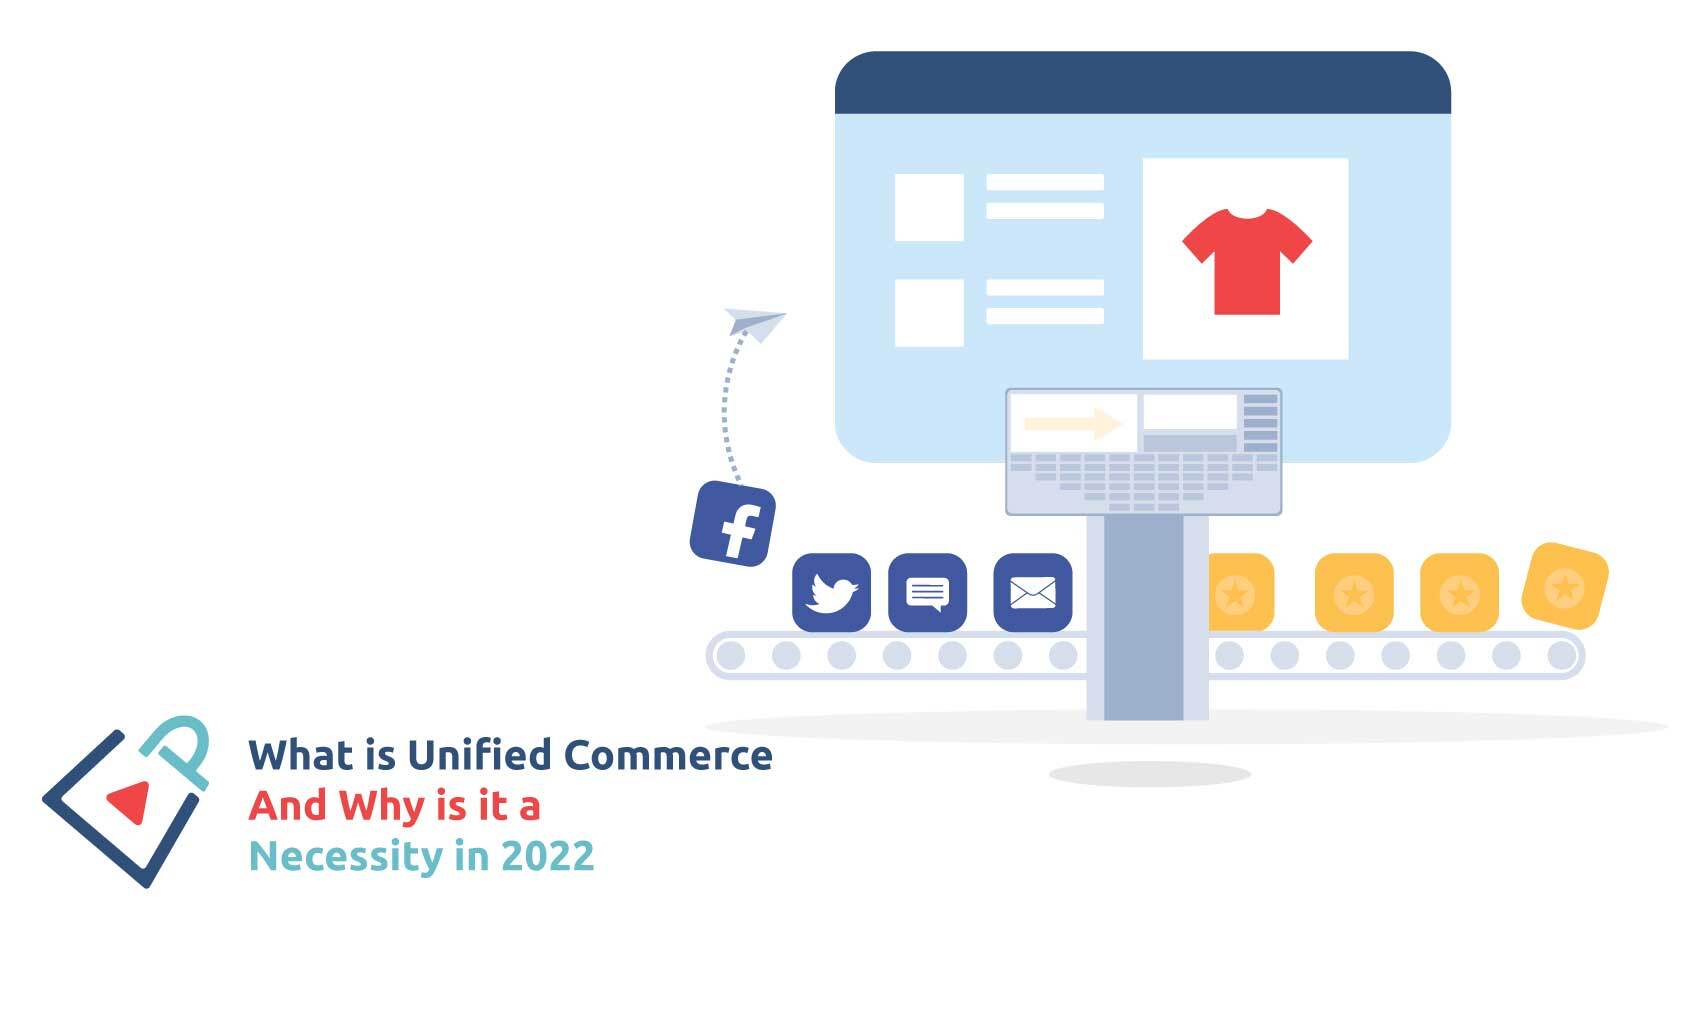 What is unified commerce and it's importance in ecommerce retail for 2022